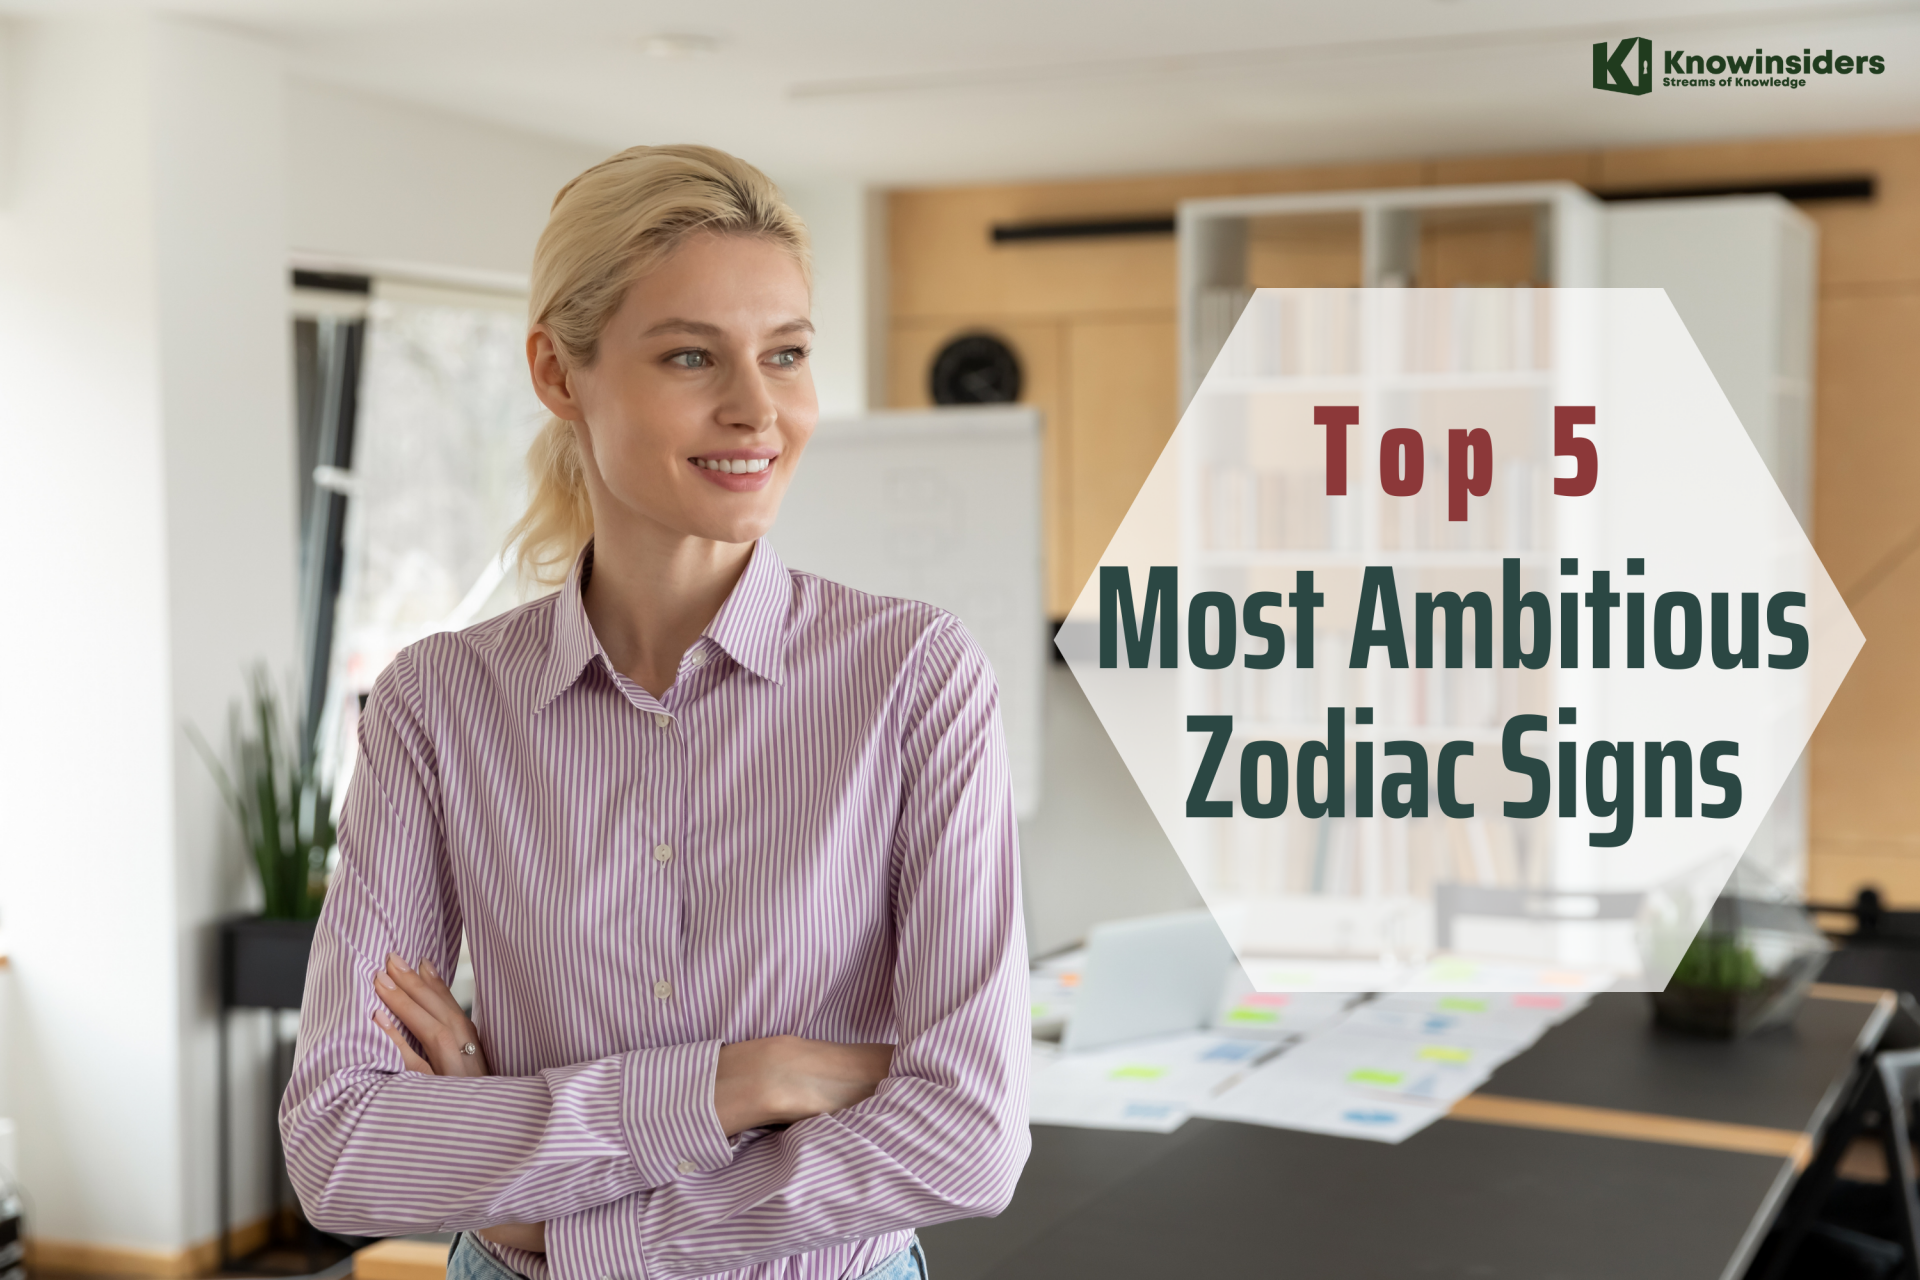 Top 5 Most Ambitious Zodiac Signs - According to Astrology